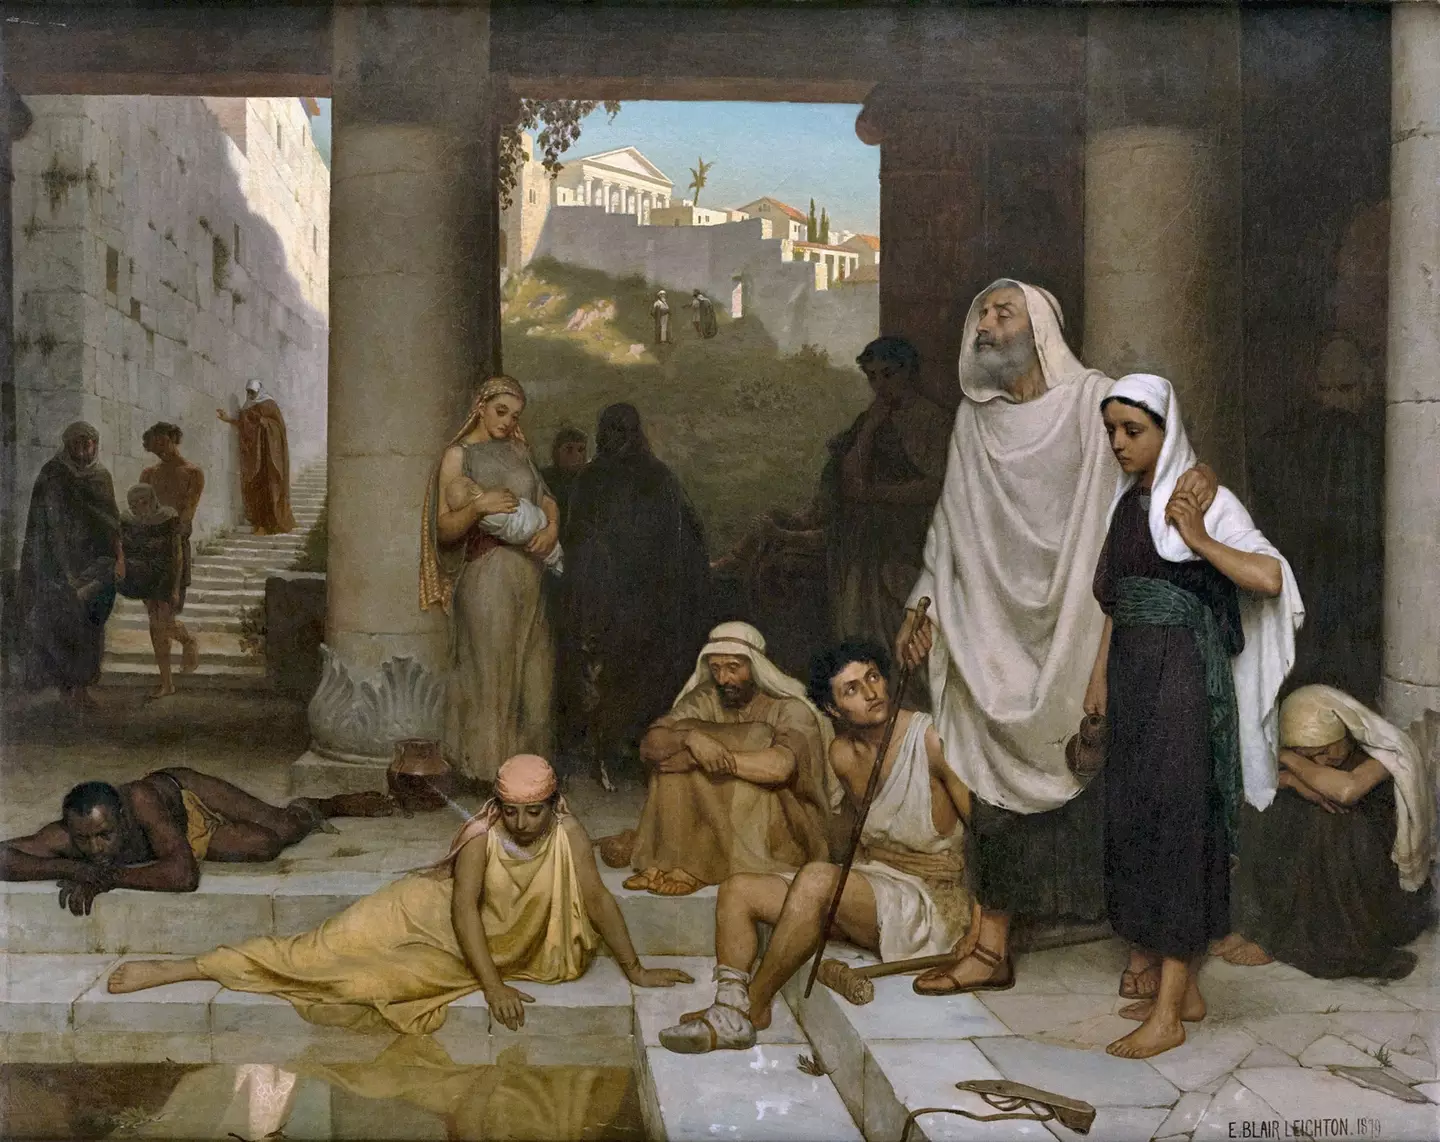 A blind man was allegedly cured by Jesus at the Pool of Siloam.